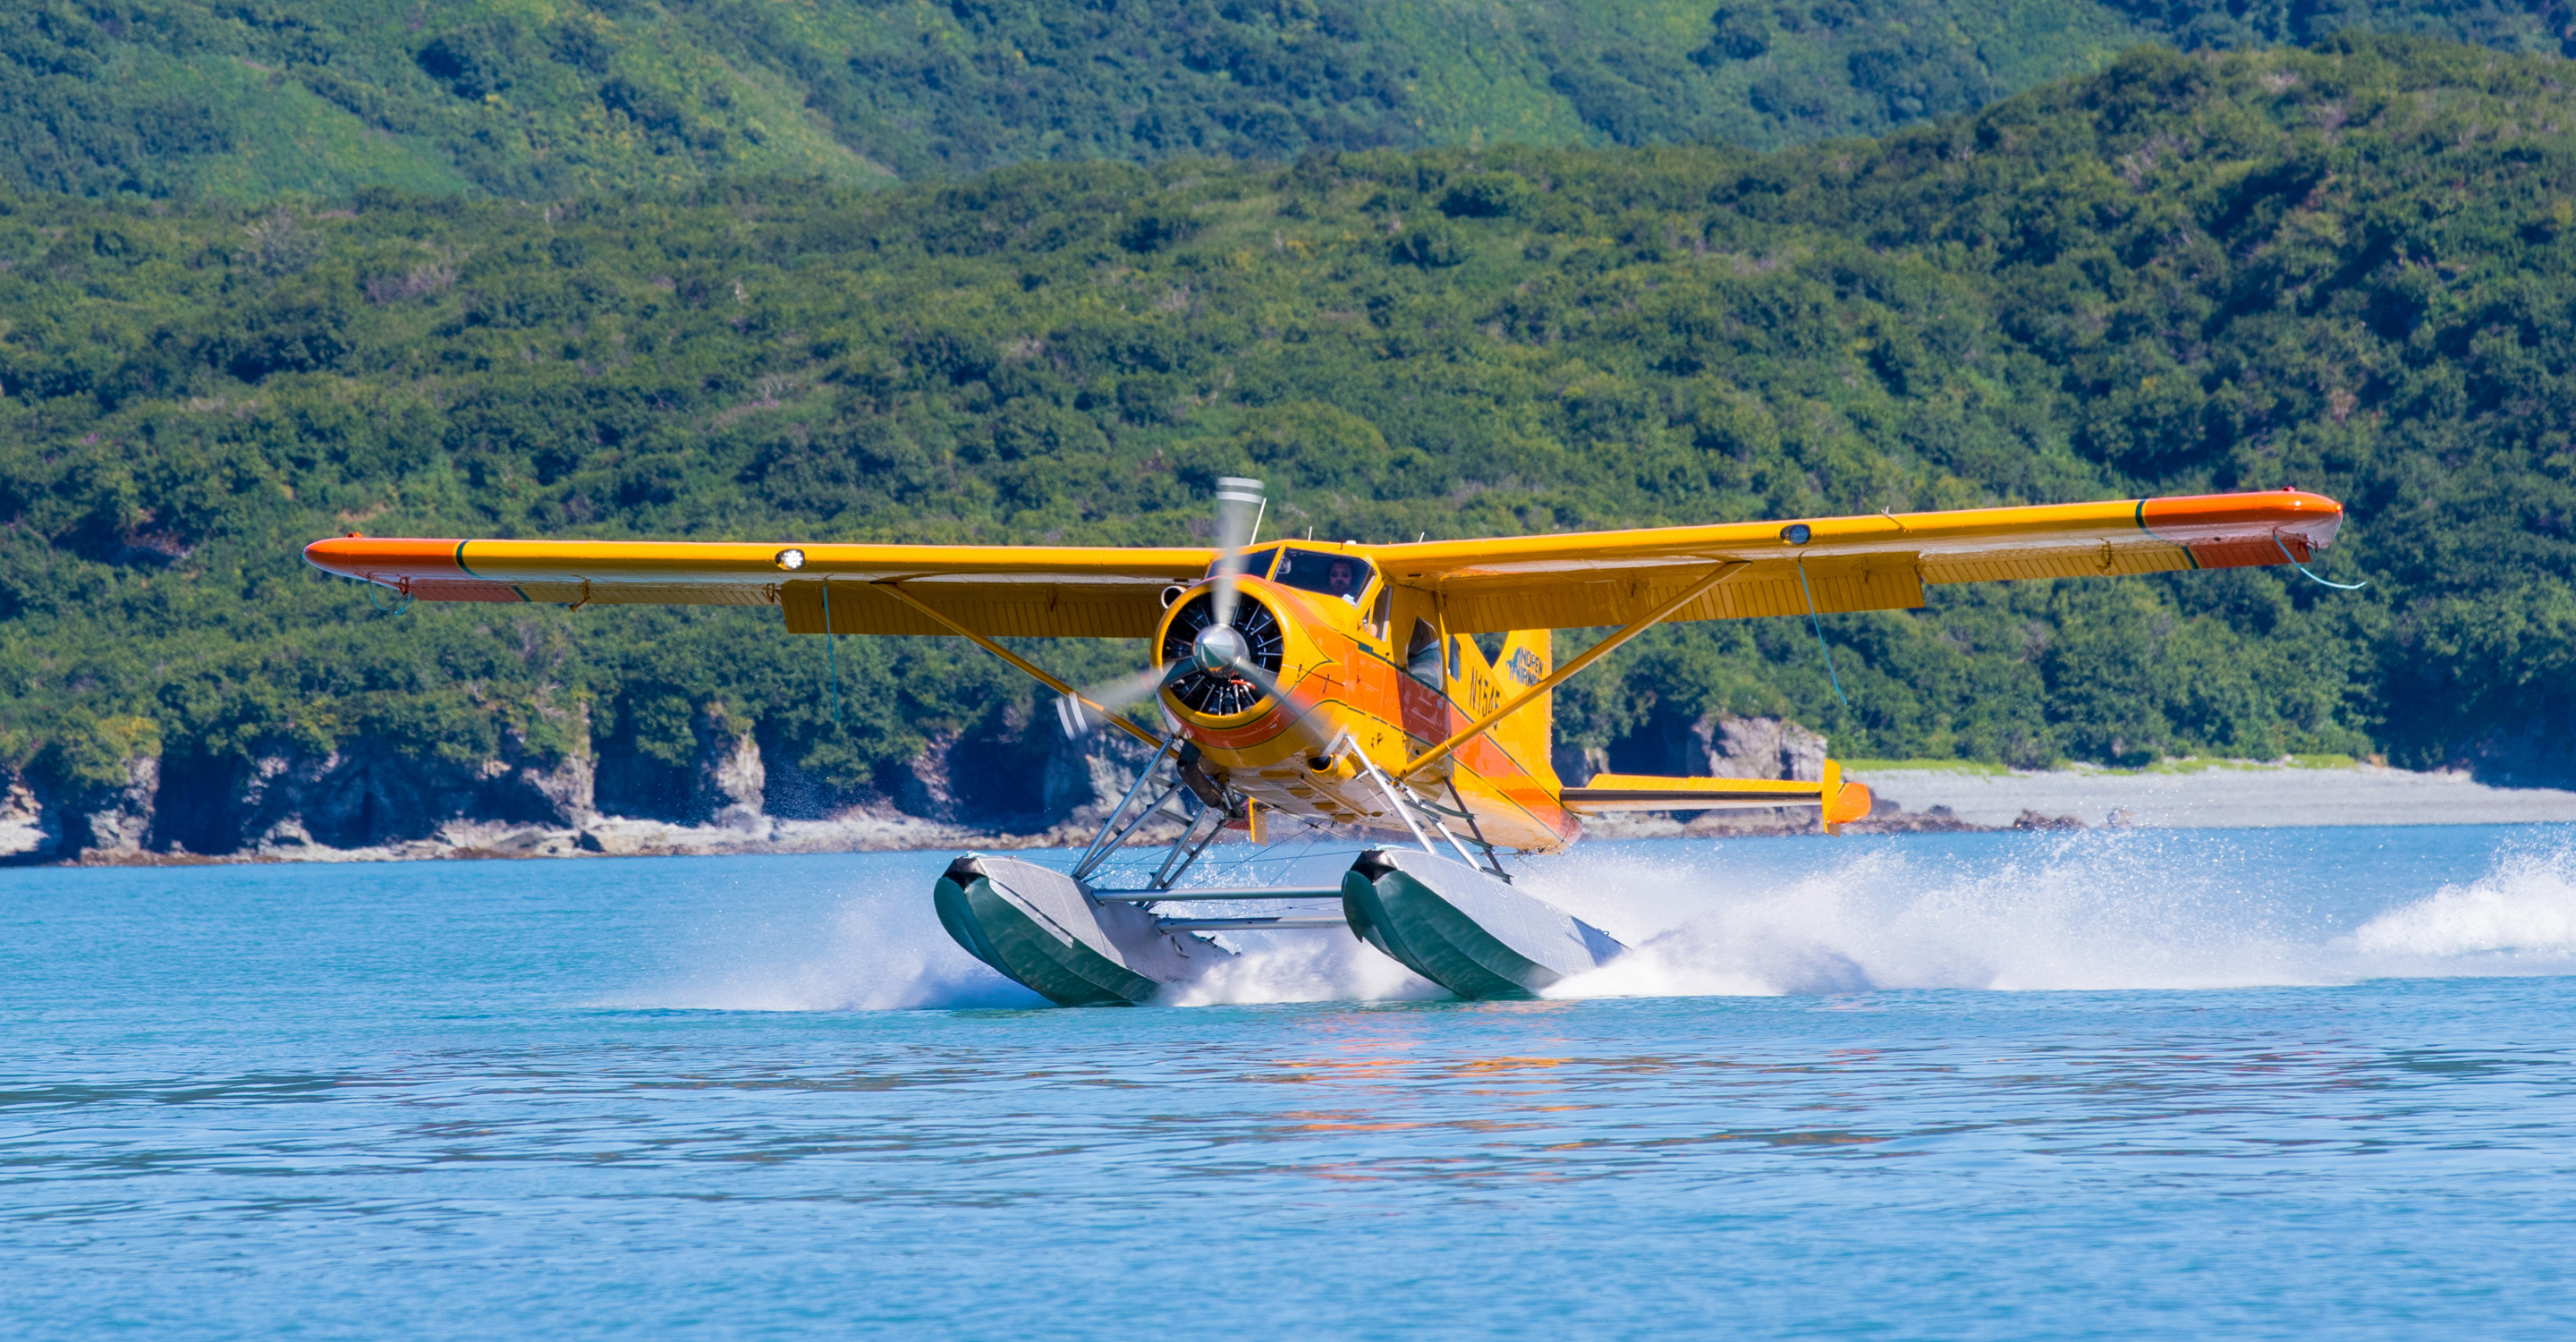 A float plane takes off from the water in Katmai National Park, Alaska, USA